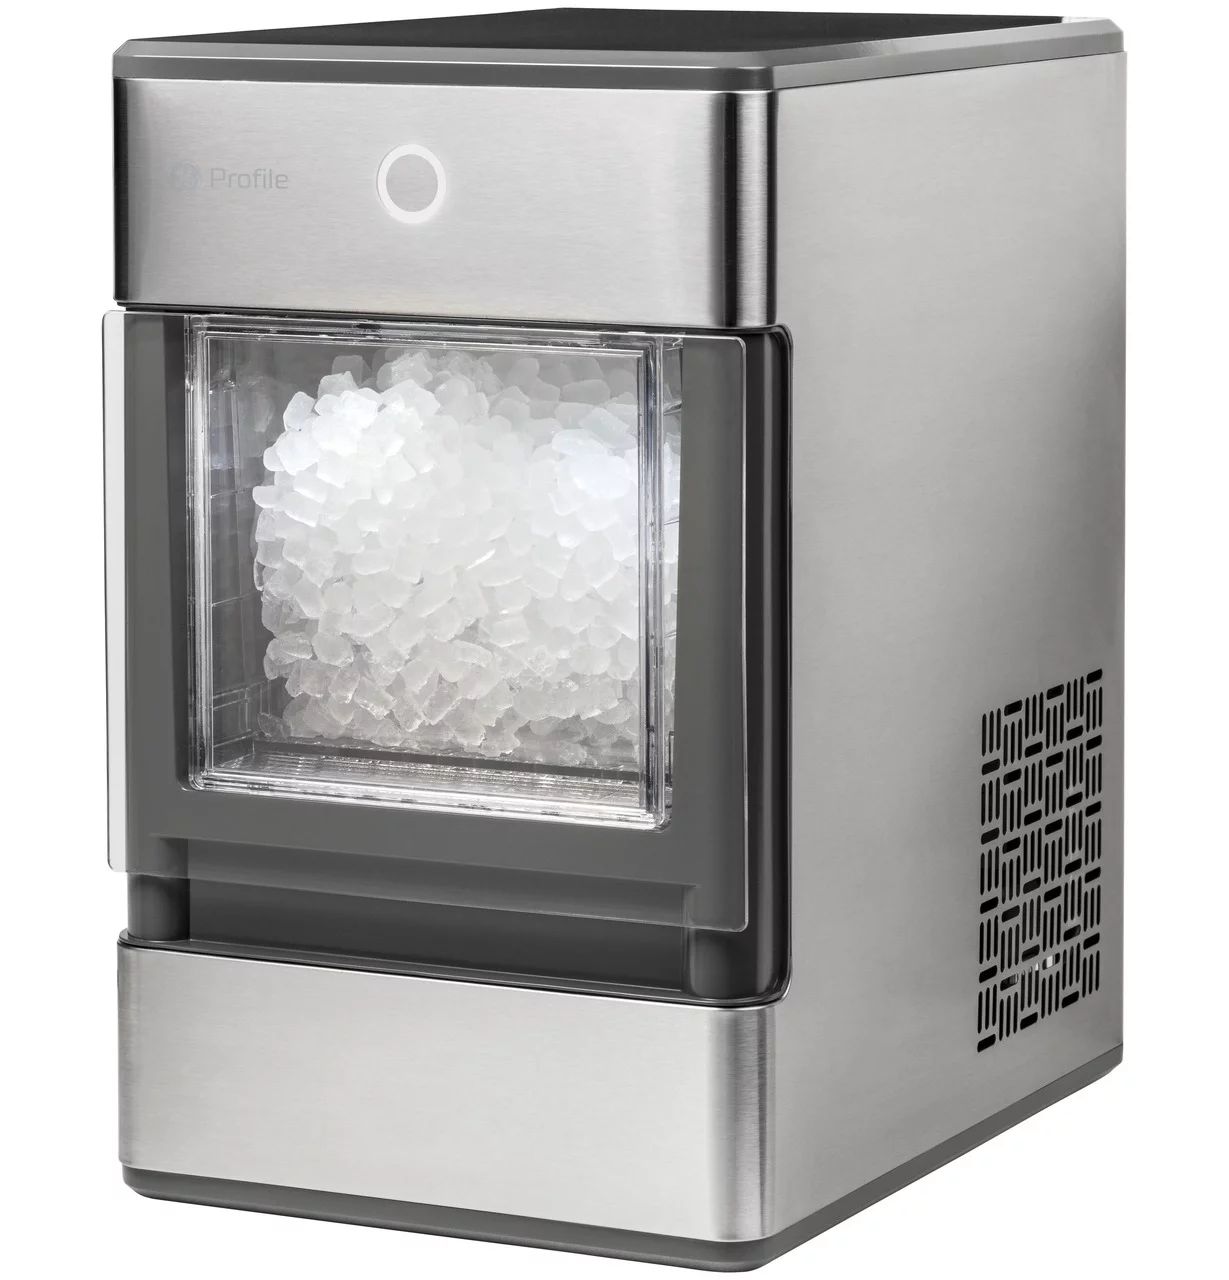 GENERAL ELECTRIC Up to 24 lbs Per Day Countertop Ice Maker, Stainless Steel | Walmart (US)